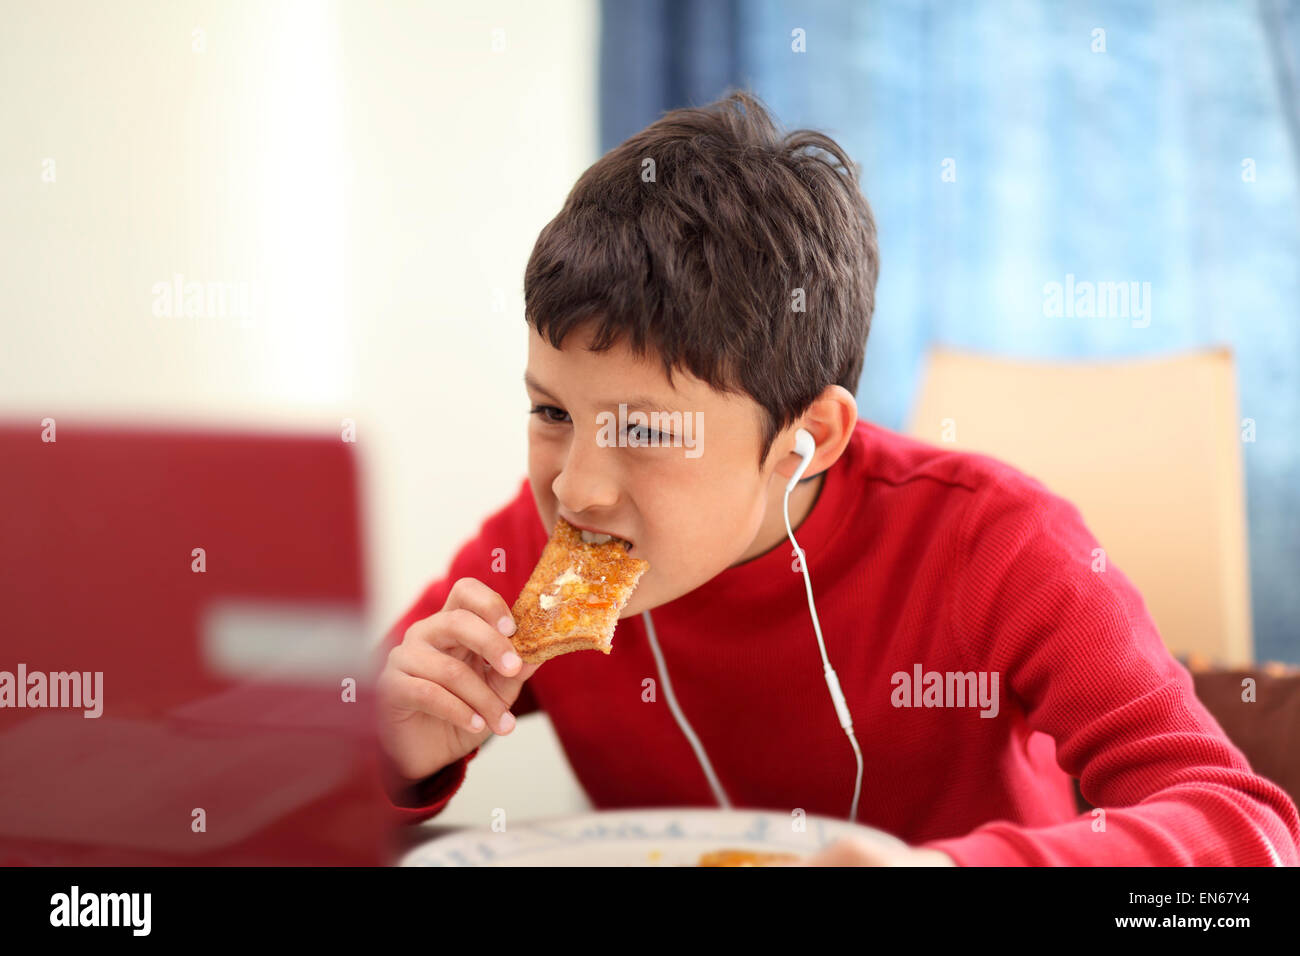 Young boy eating breakfast toast - shallow depth of field Stock Photo